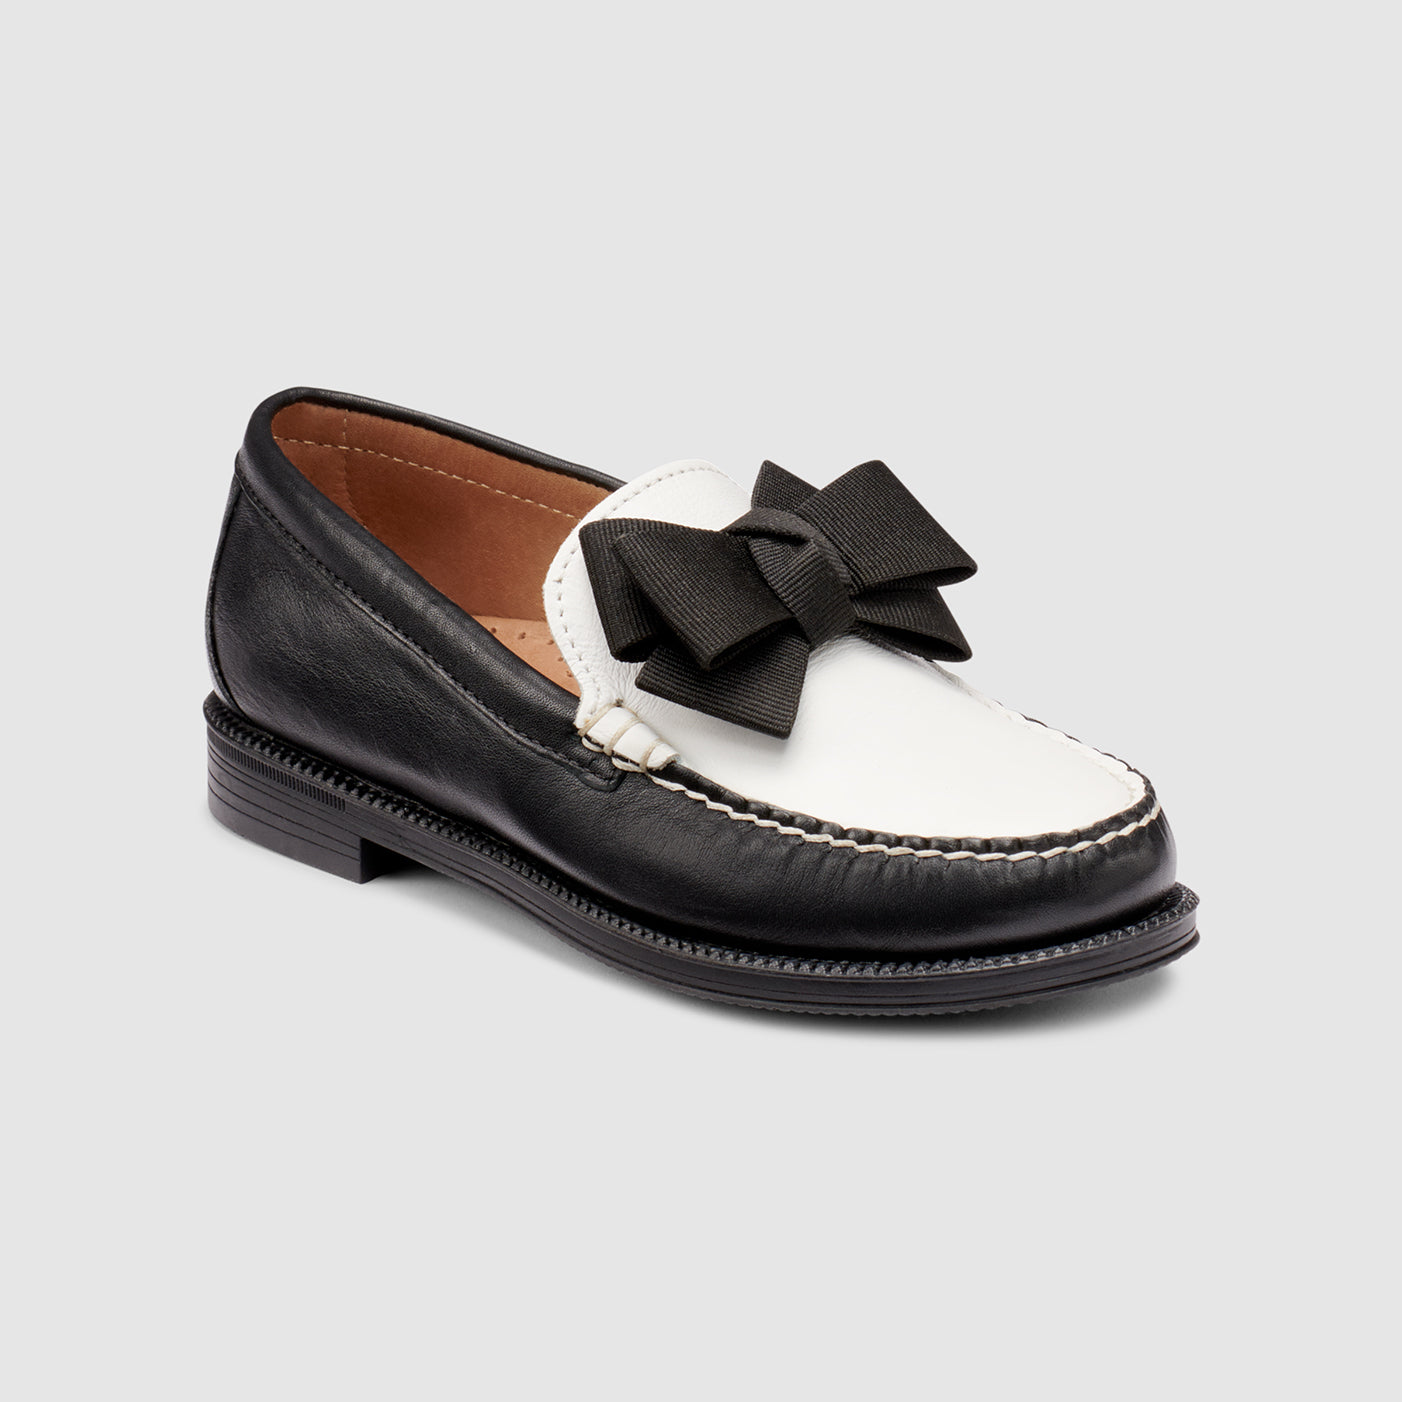 KIDS LILLIAN BOW WEEJUNS LOAFER